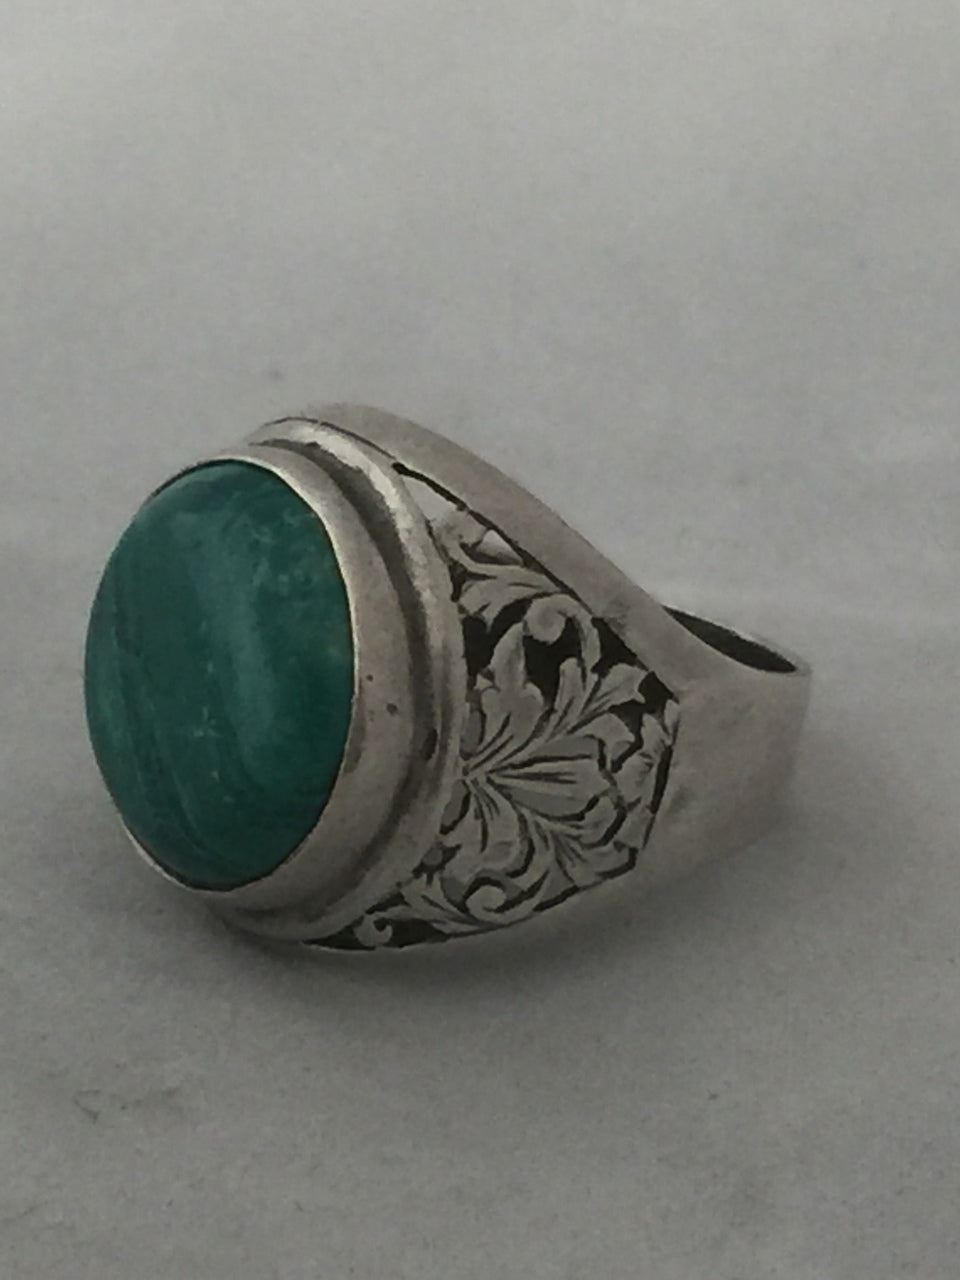 Vintage Sterling Silver Malachite Ring  Made in Israel  Size  8.25   9.7g